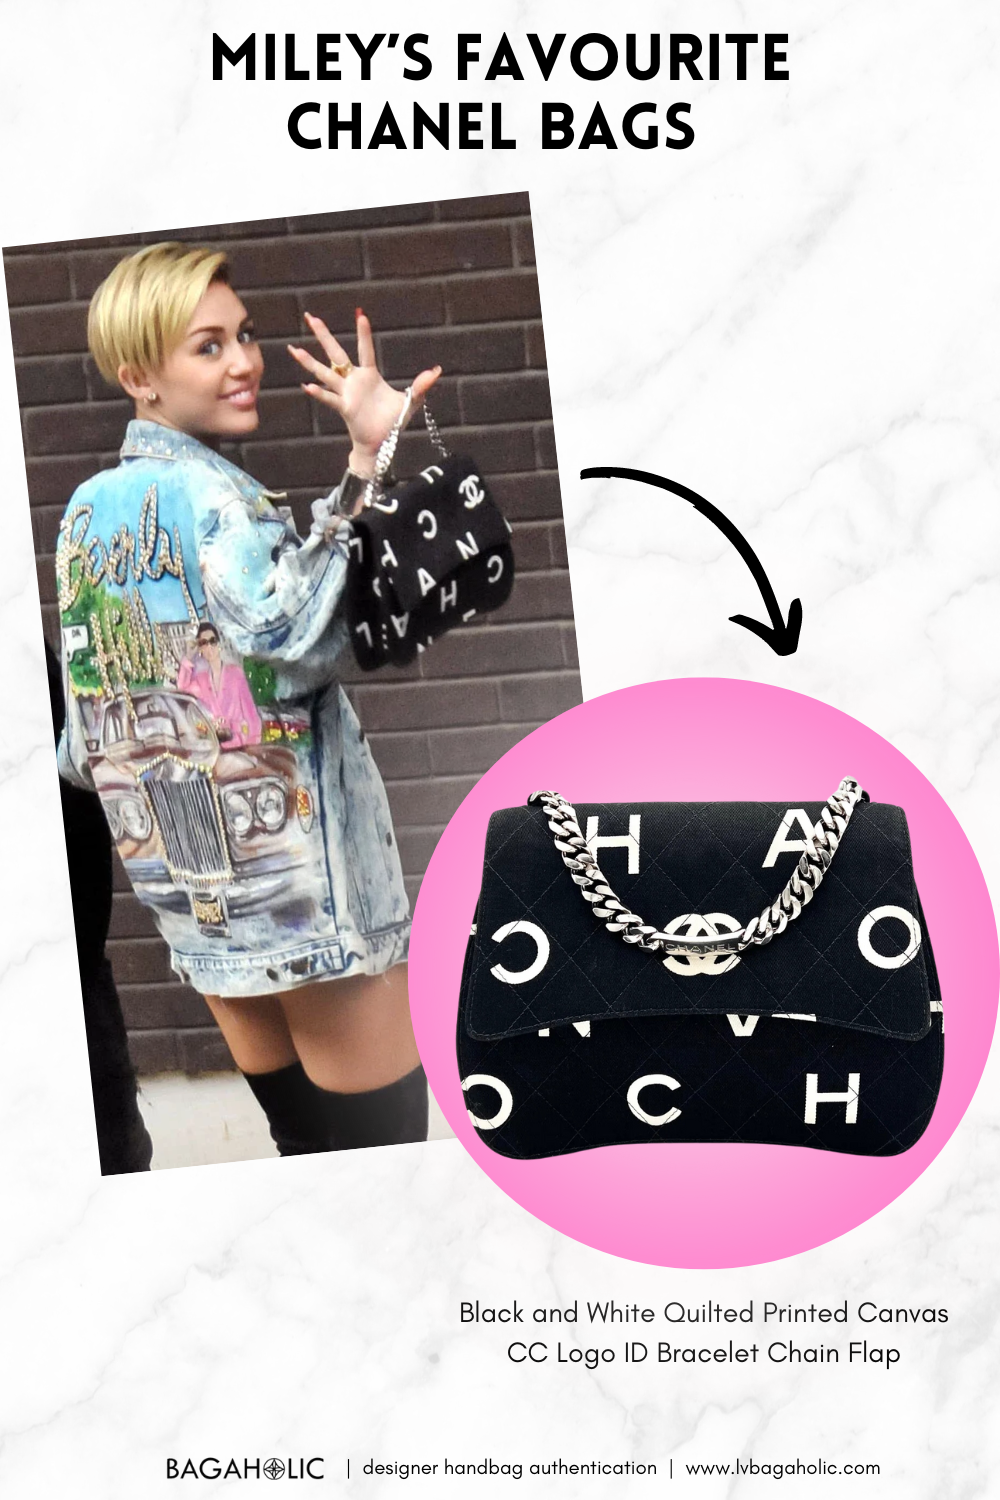 100 Celebs and Their Favorite Chanel Bags beyonce chanel boy bag celebs Part1  miley cyrus chanel bag bracelet chain